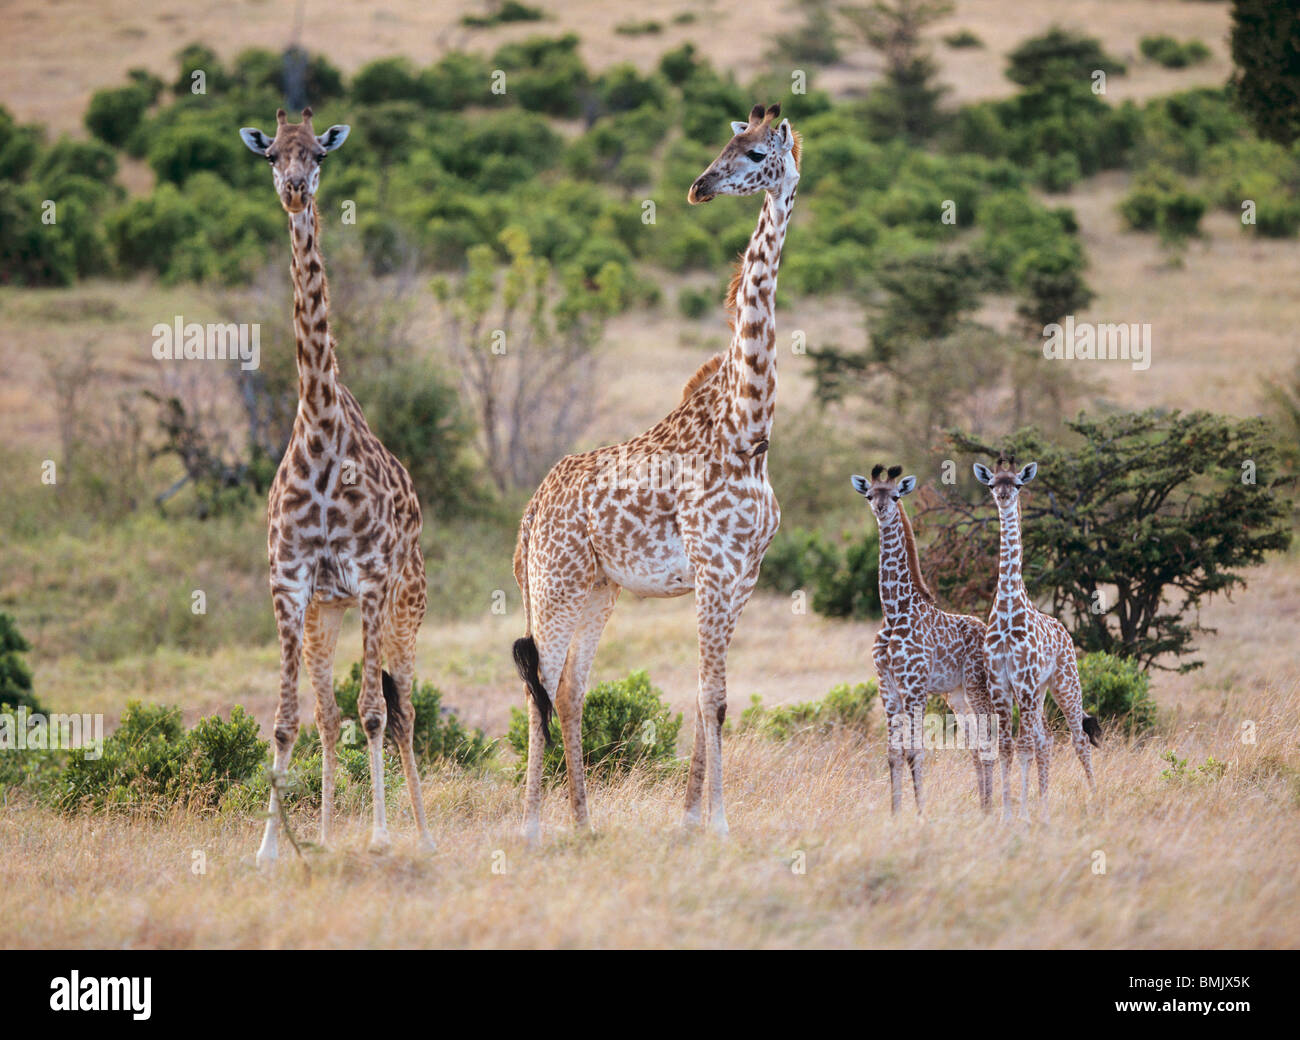 two Giraffes with two cubs / Giraffa camelopardalis Stock Photo